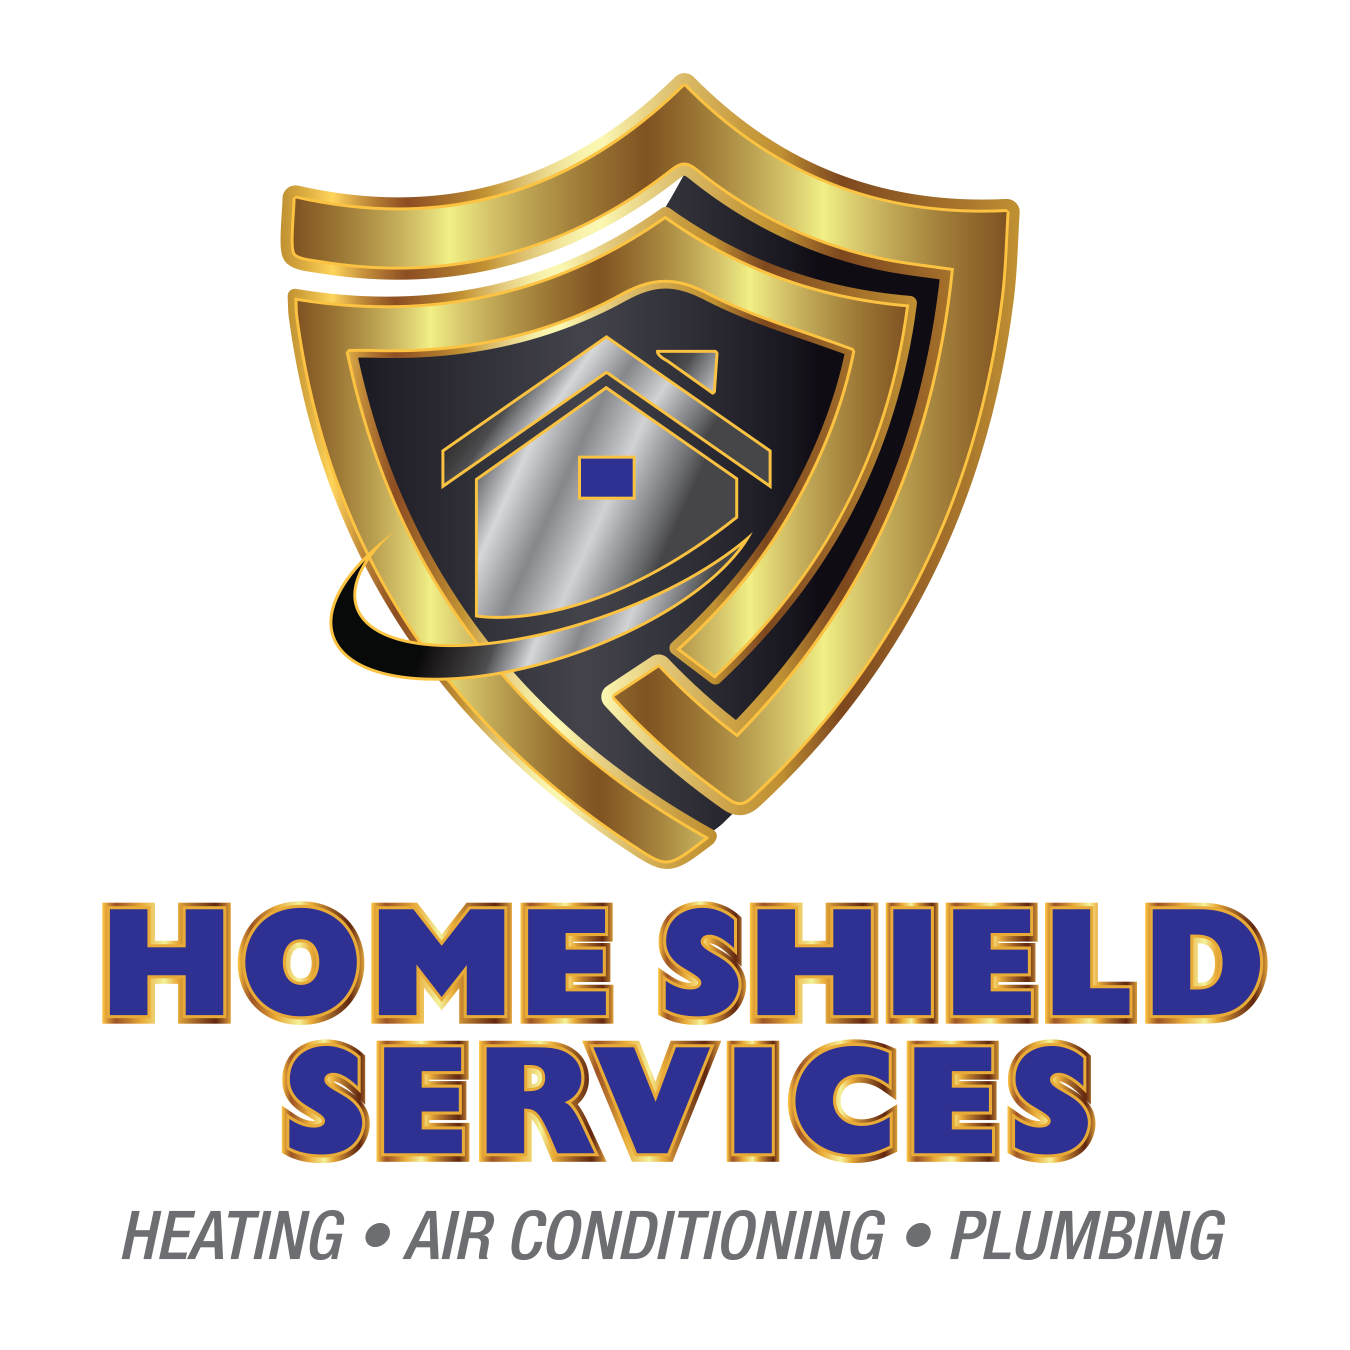 HomeShield Services